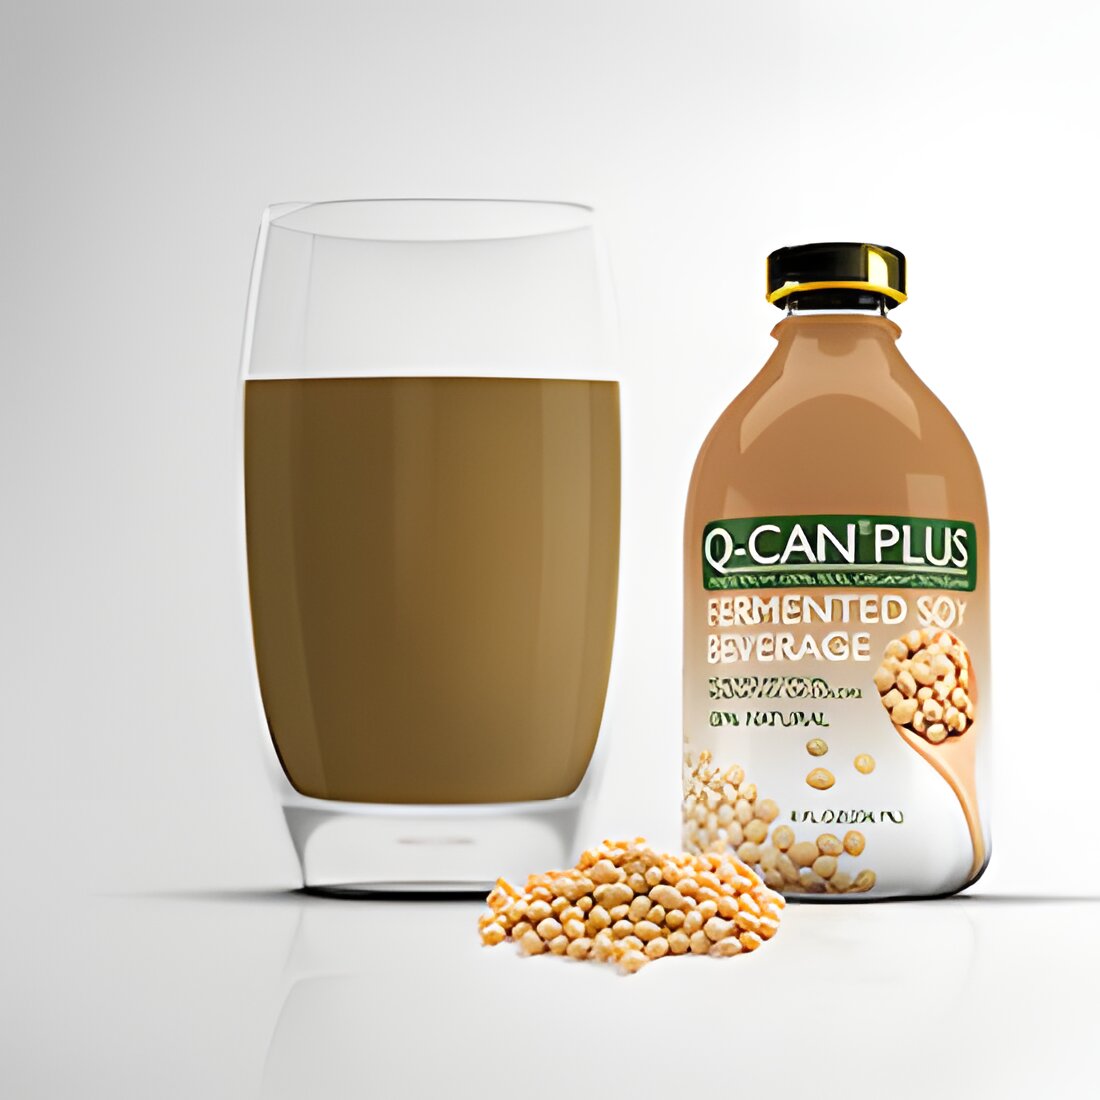 Free Q-CanÂ® Plus Nutritional Fermented Soy Beverage